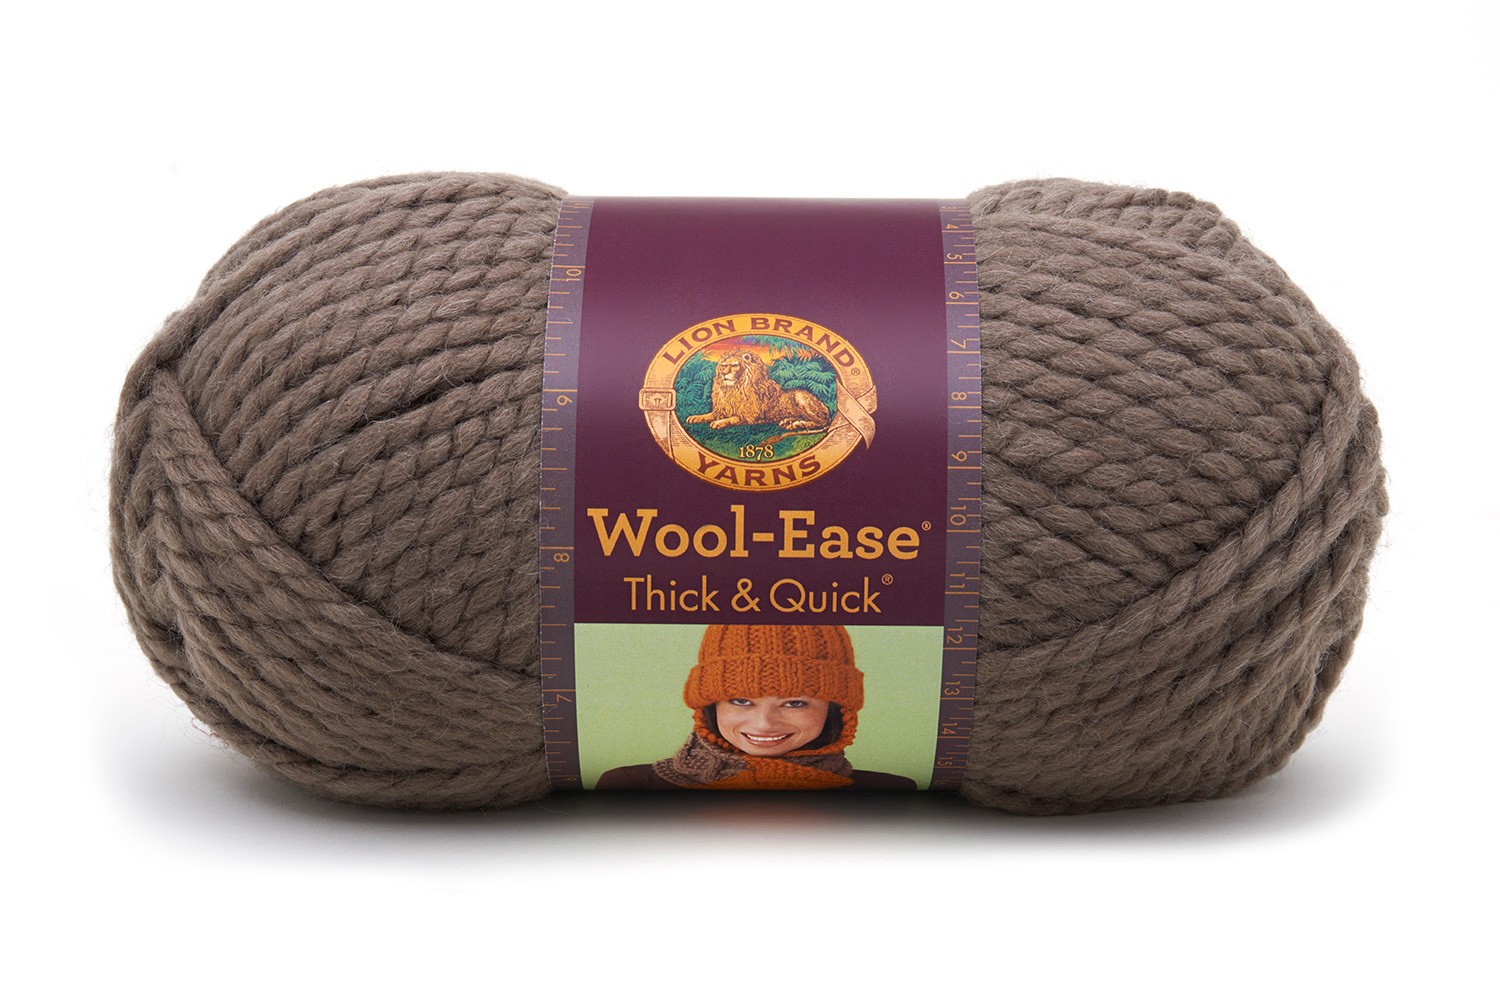 Wool-Ease Thick and Quick in Taupe